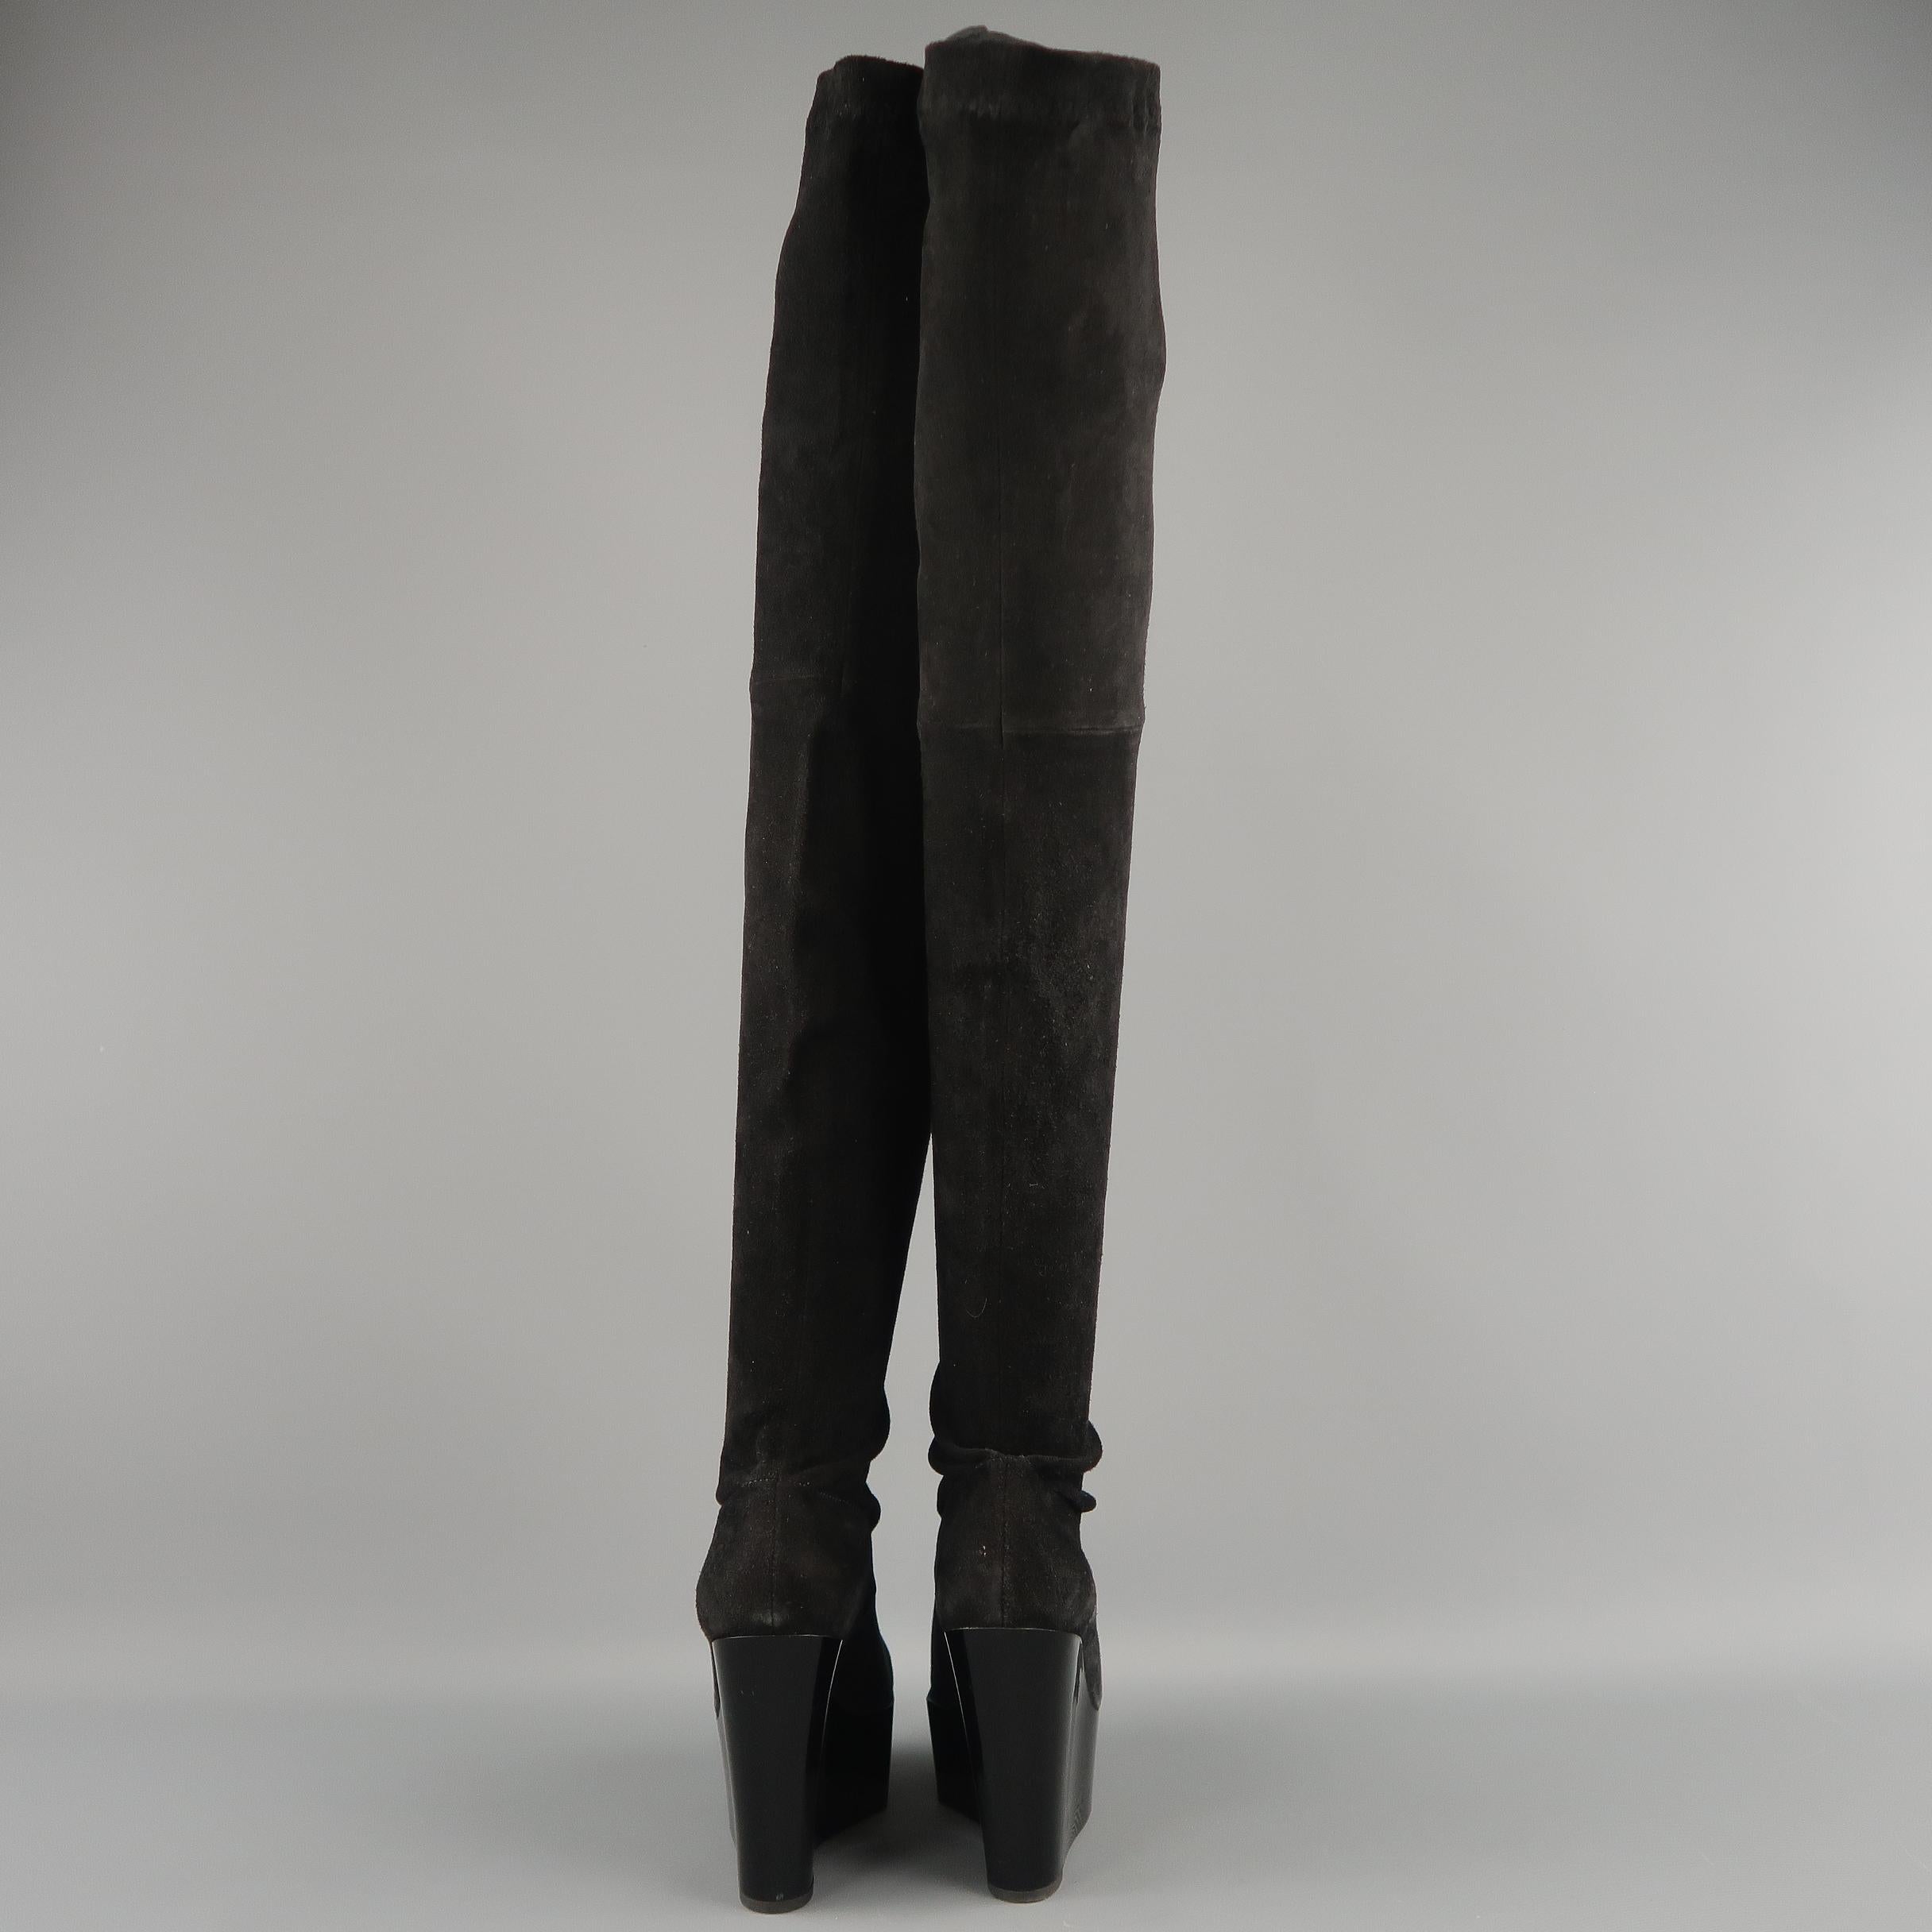 ROBERT CLERGERIE Size 5 Black Suede Lacquared Platform Wedge Thigh High Boots 3